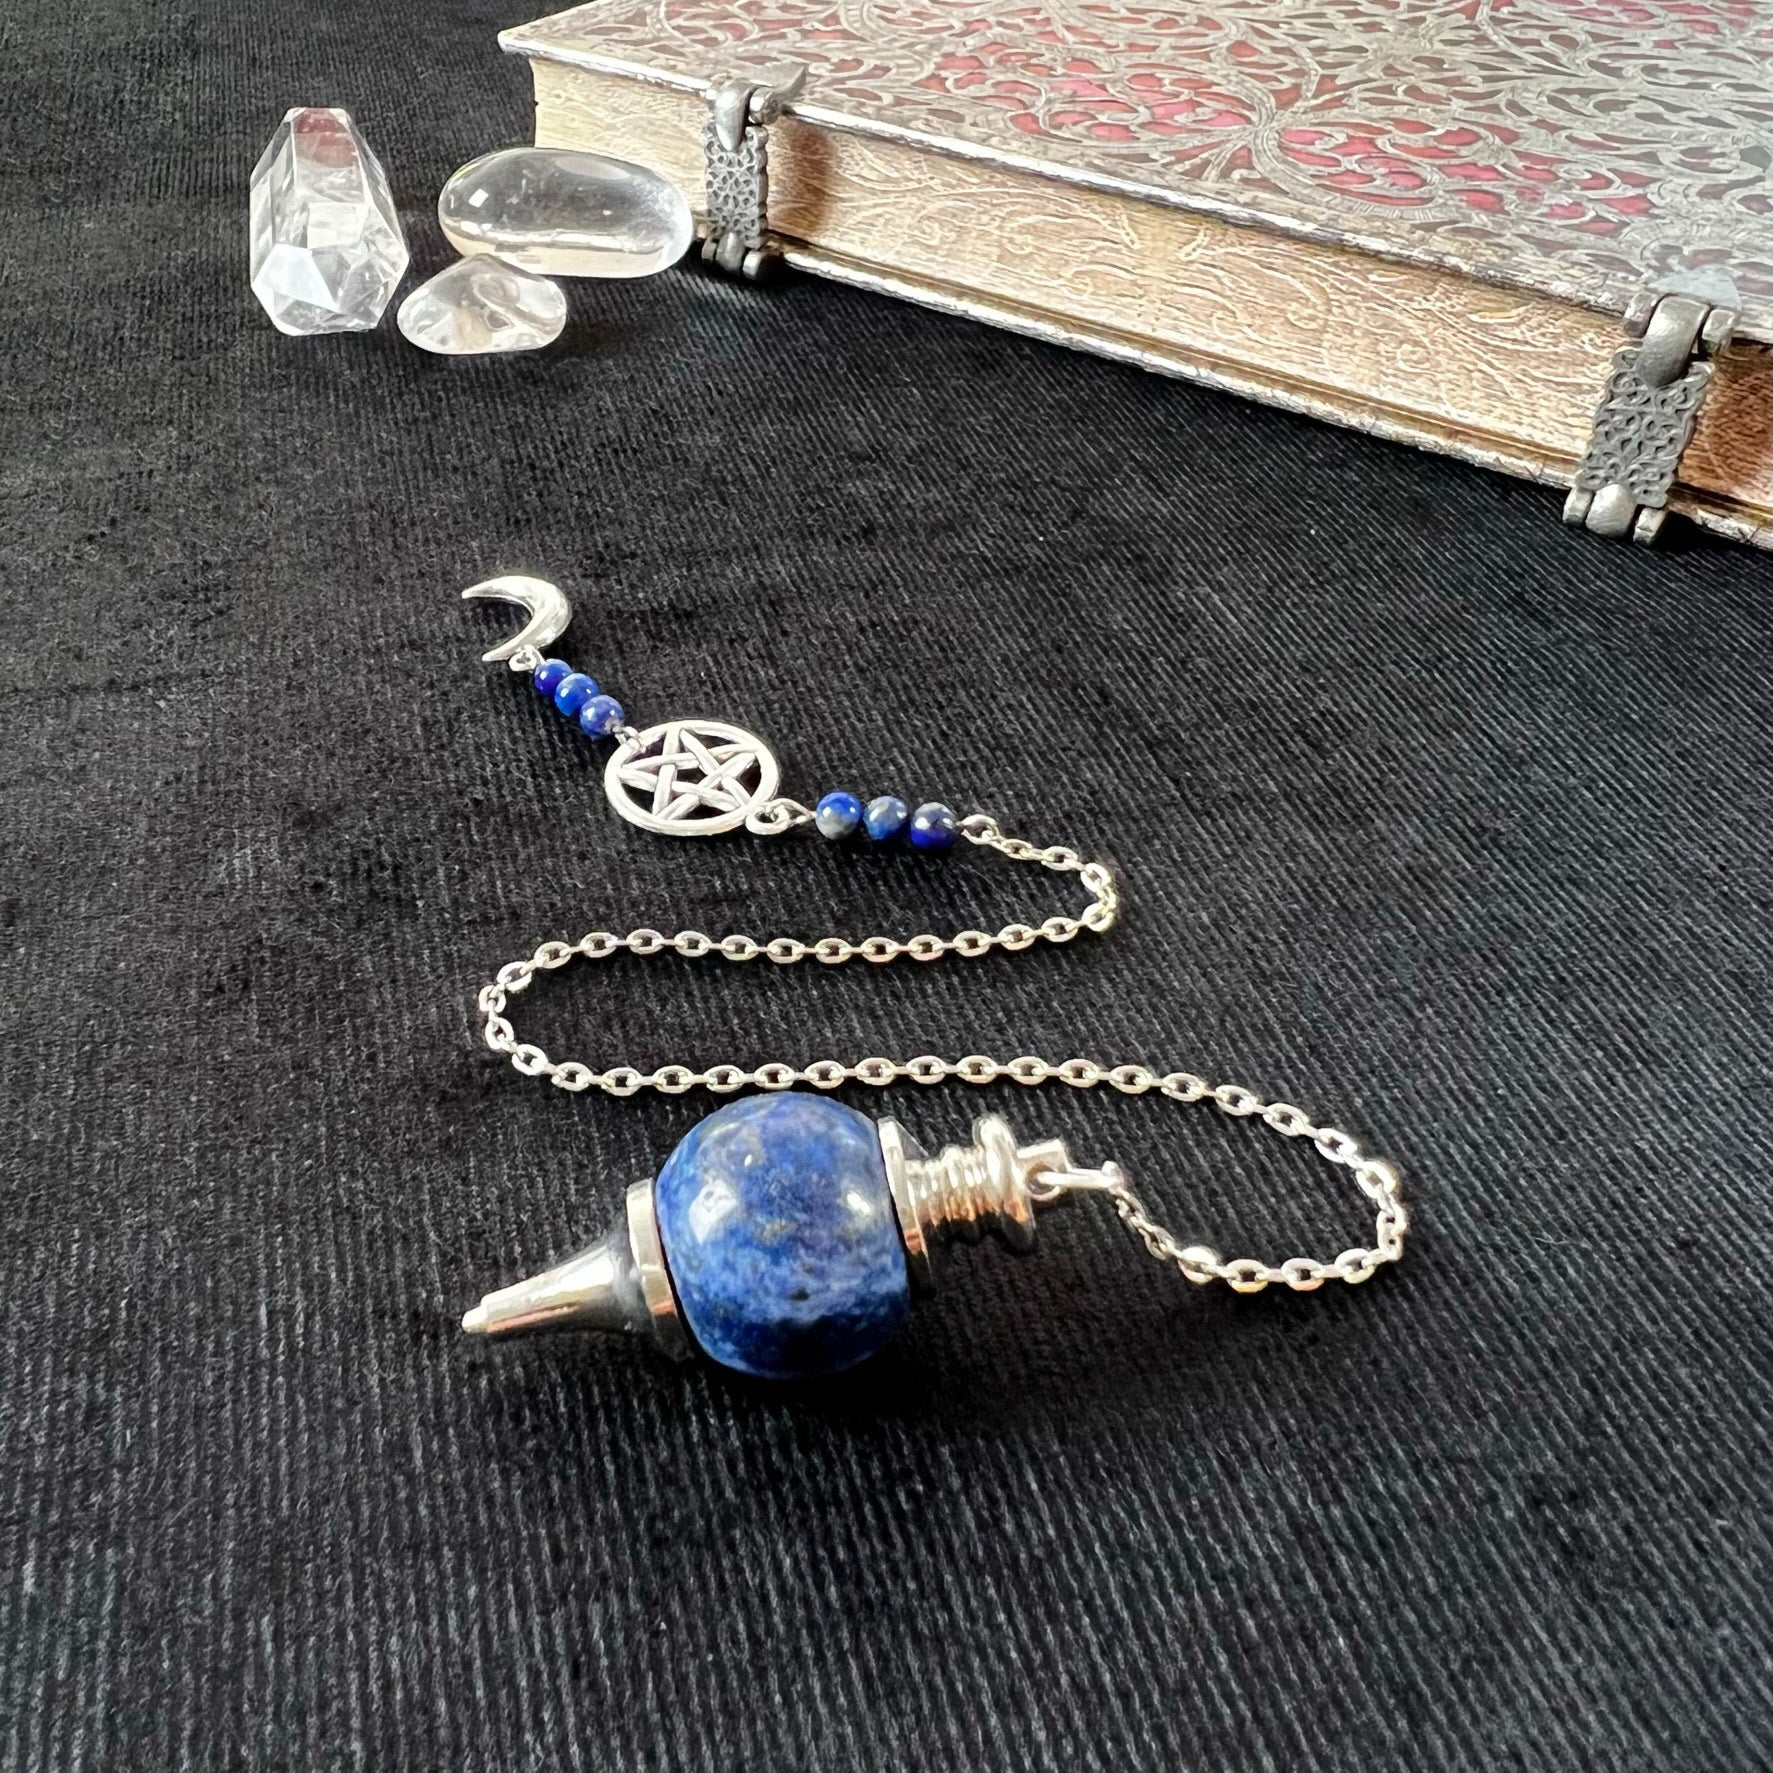 Lapis lazuli, pentacle and Moon crescent Sephoroton divination pendulum - The French Witch shop